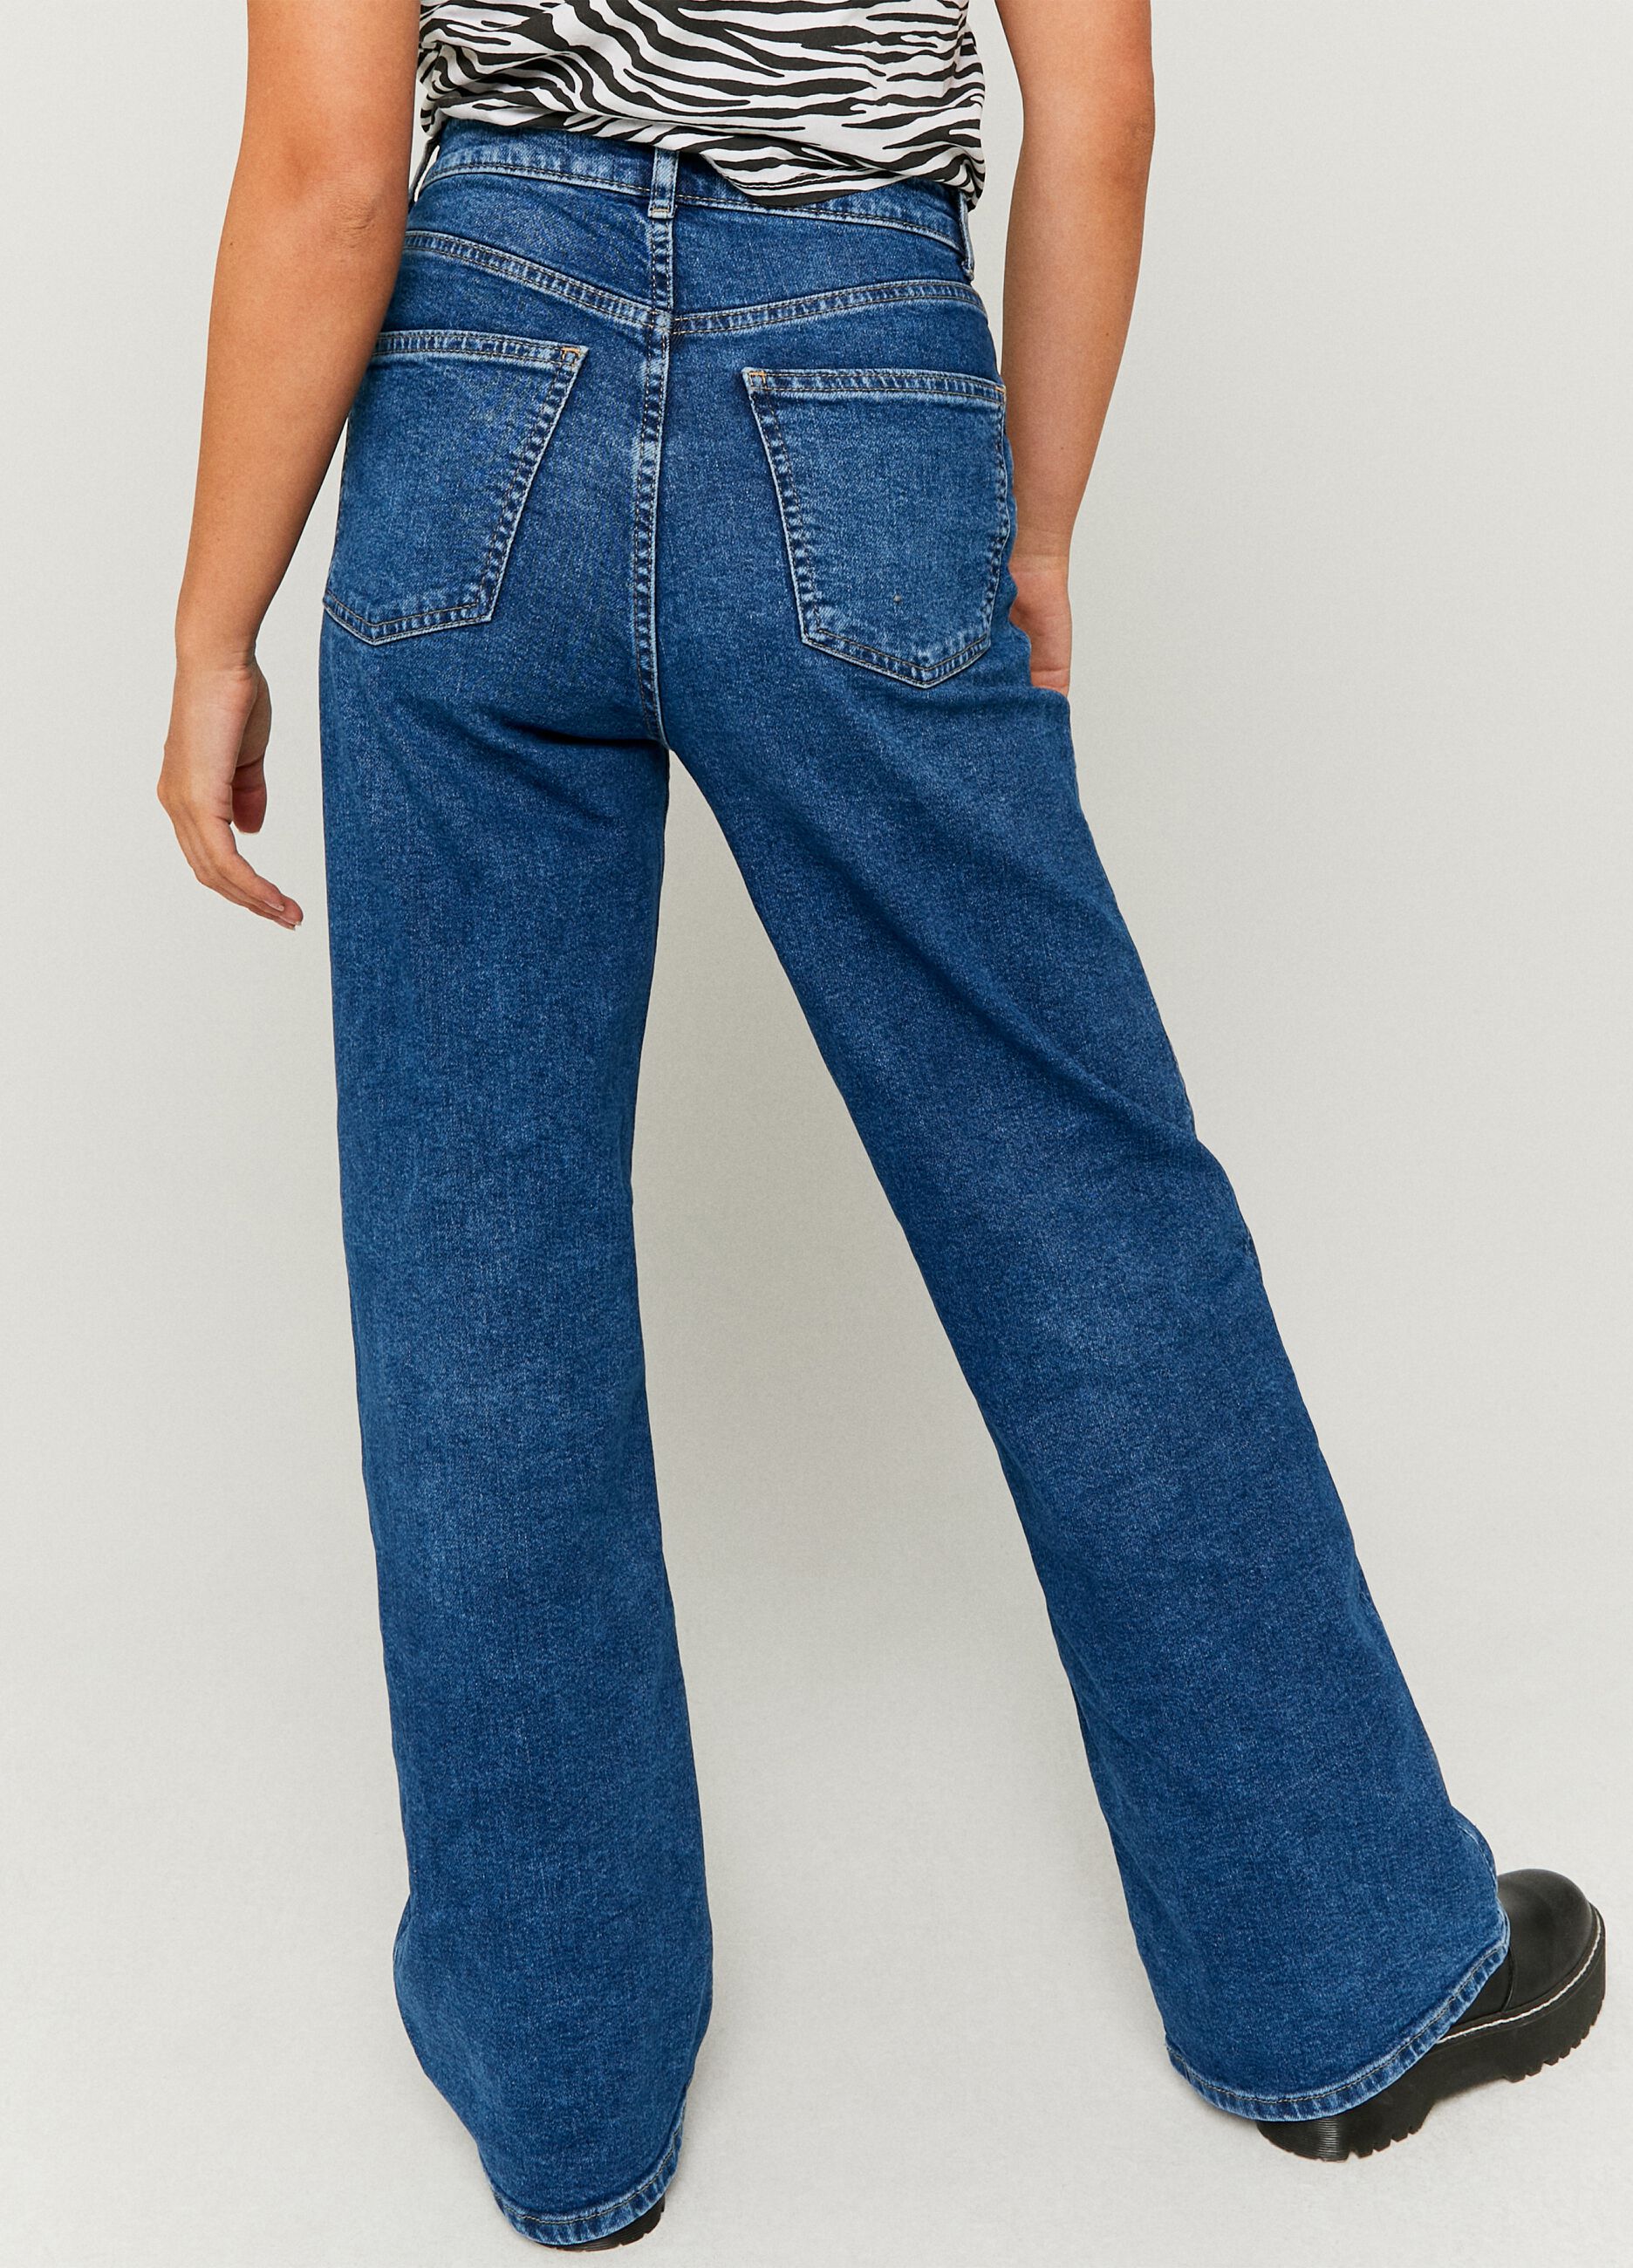 Wide jeans with high waist